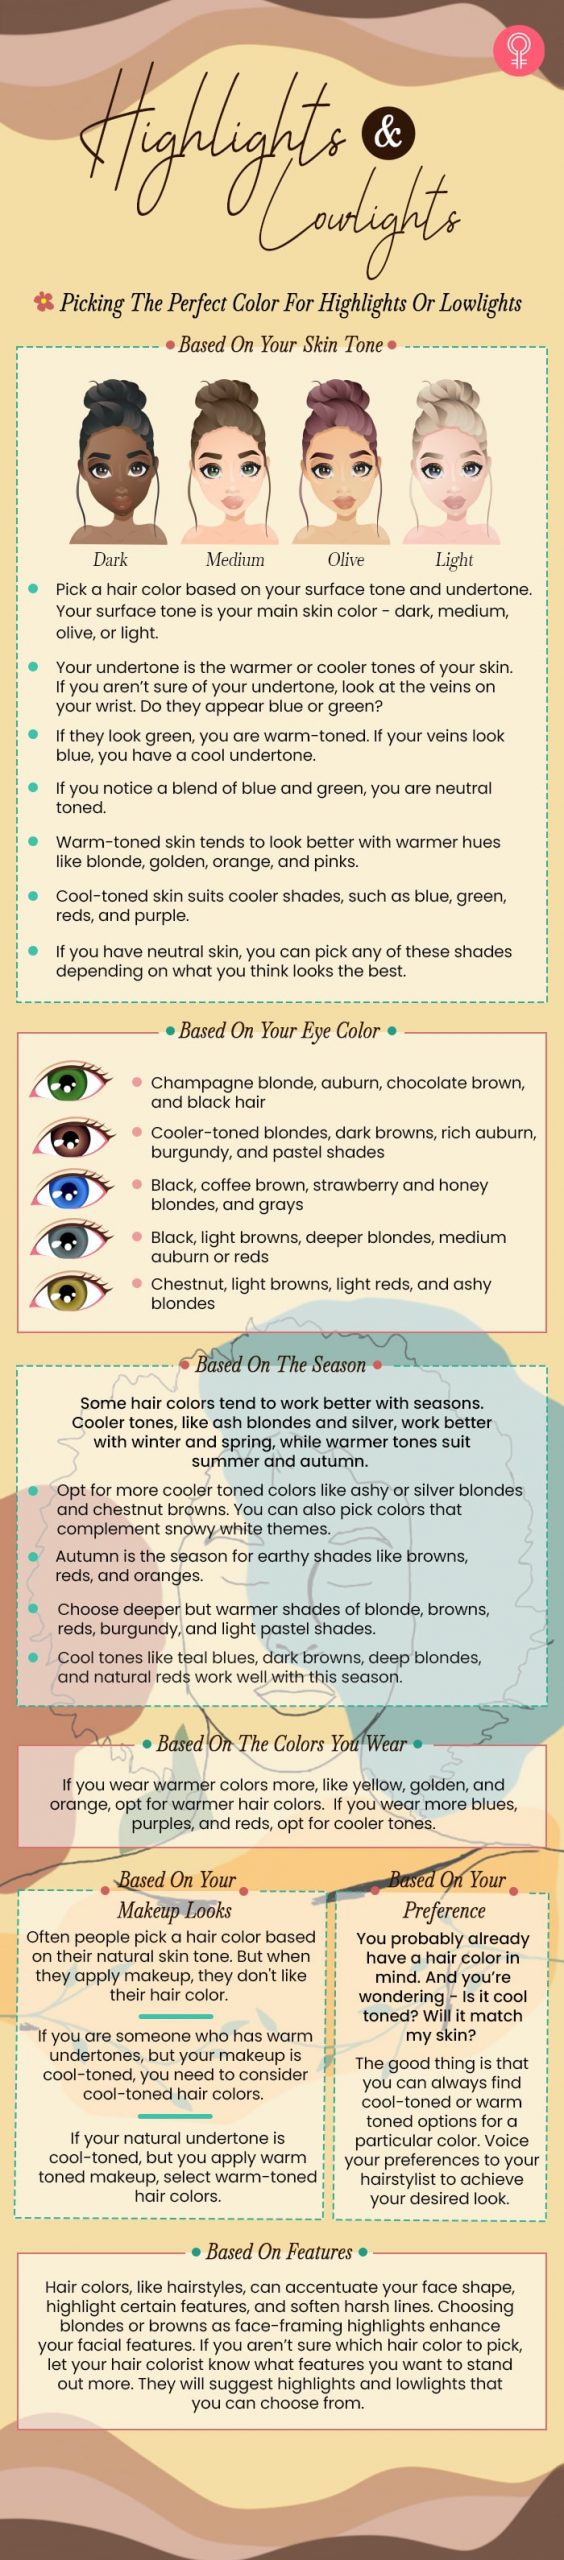 how to pick the perfect color for highlights or lowlights (infographic)